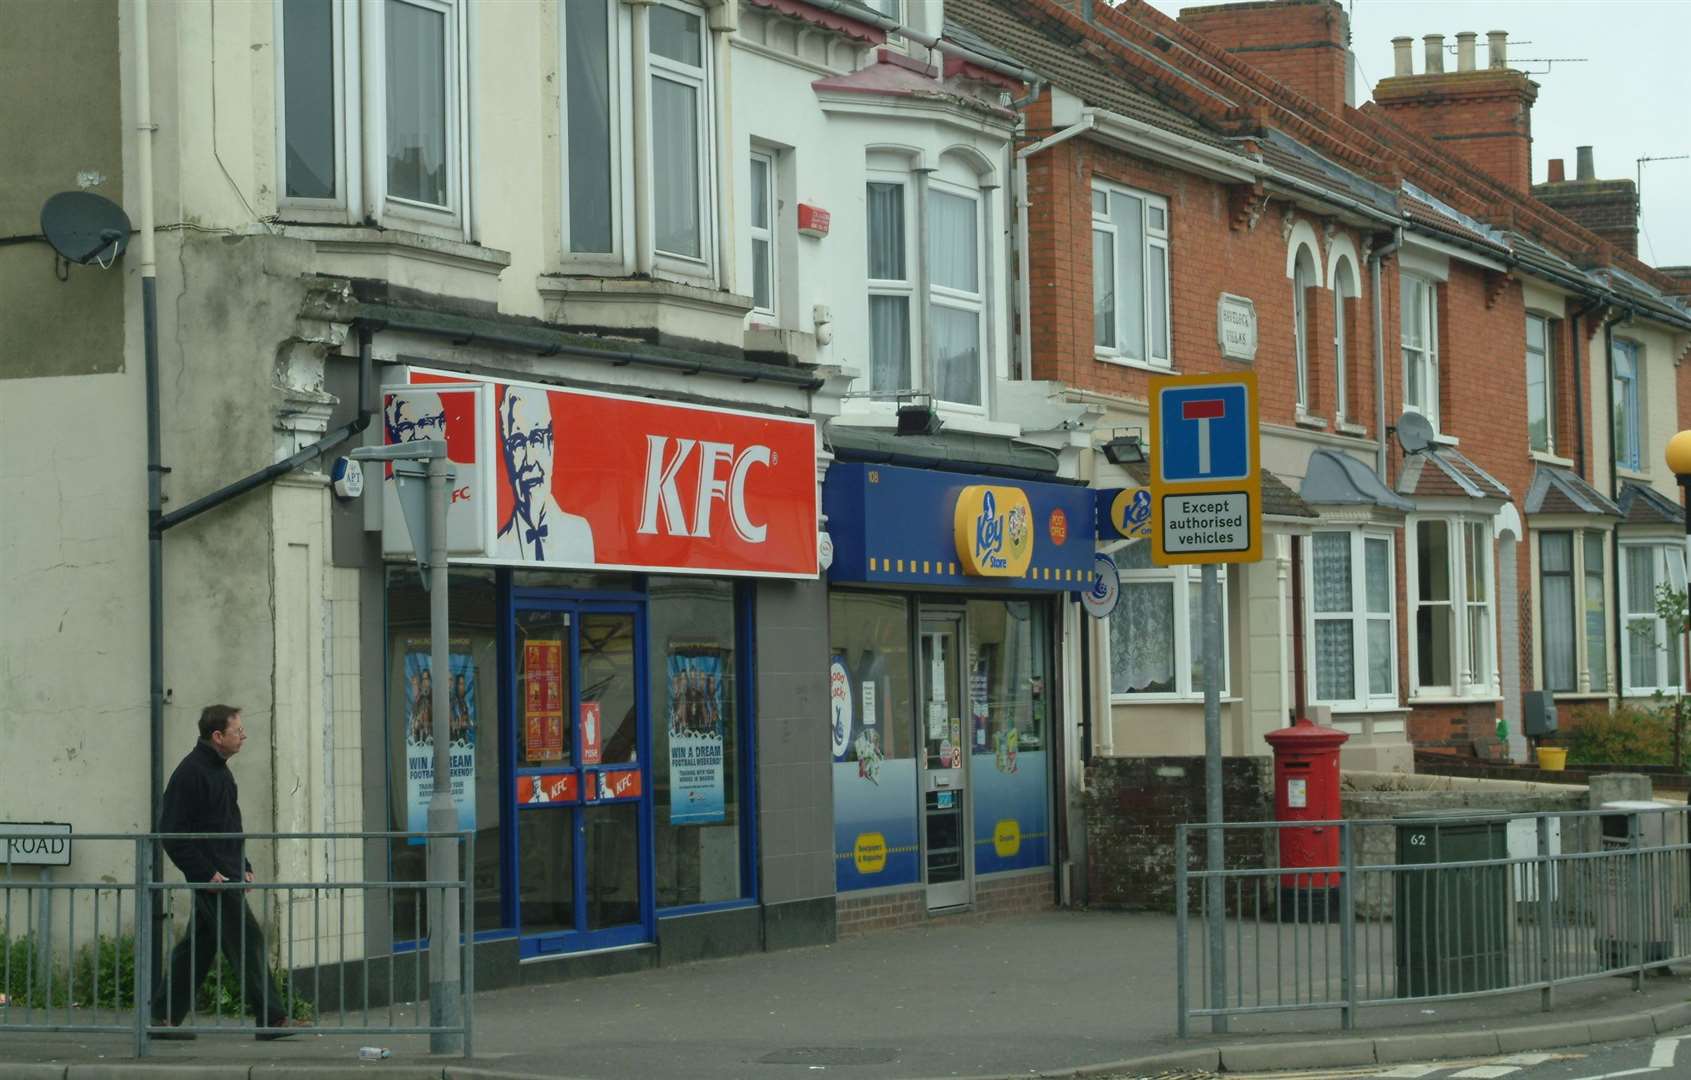 Ashford already has three KFC branches – including this one in Beaver Road, pictured in 2004